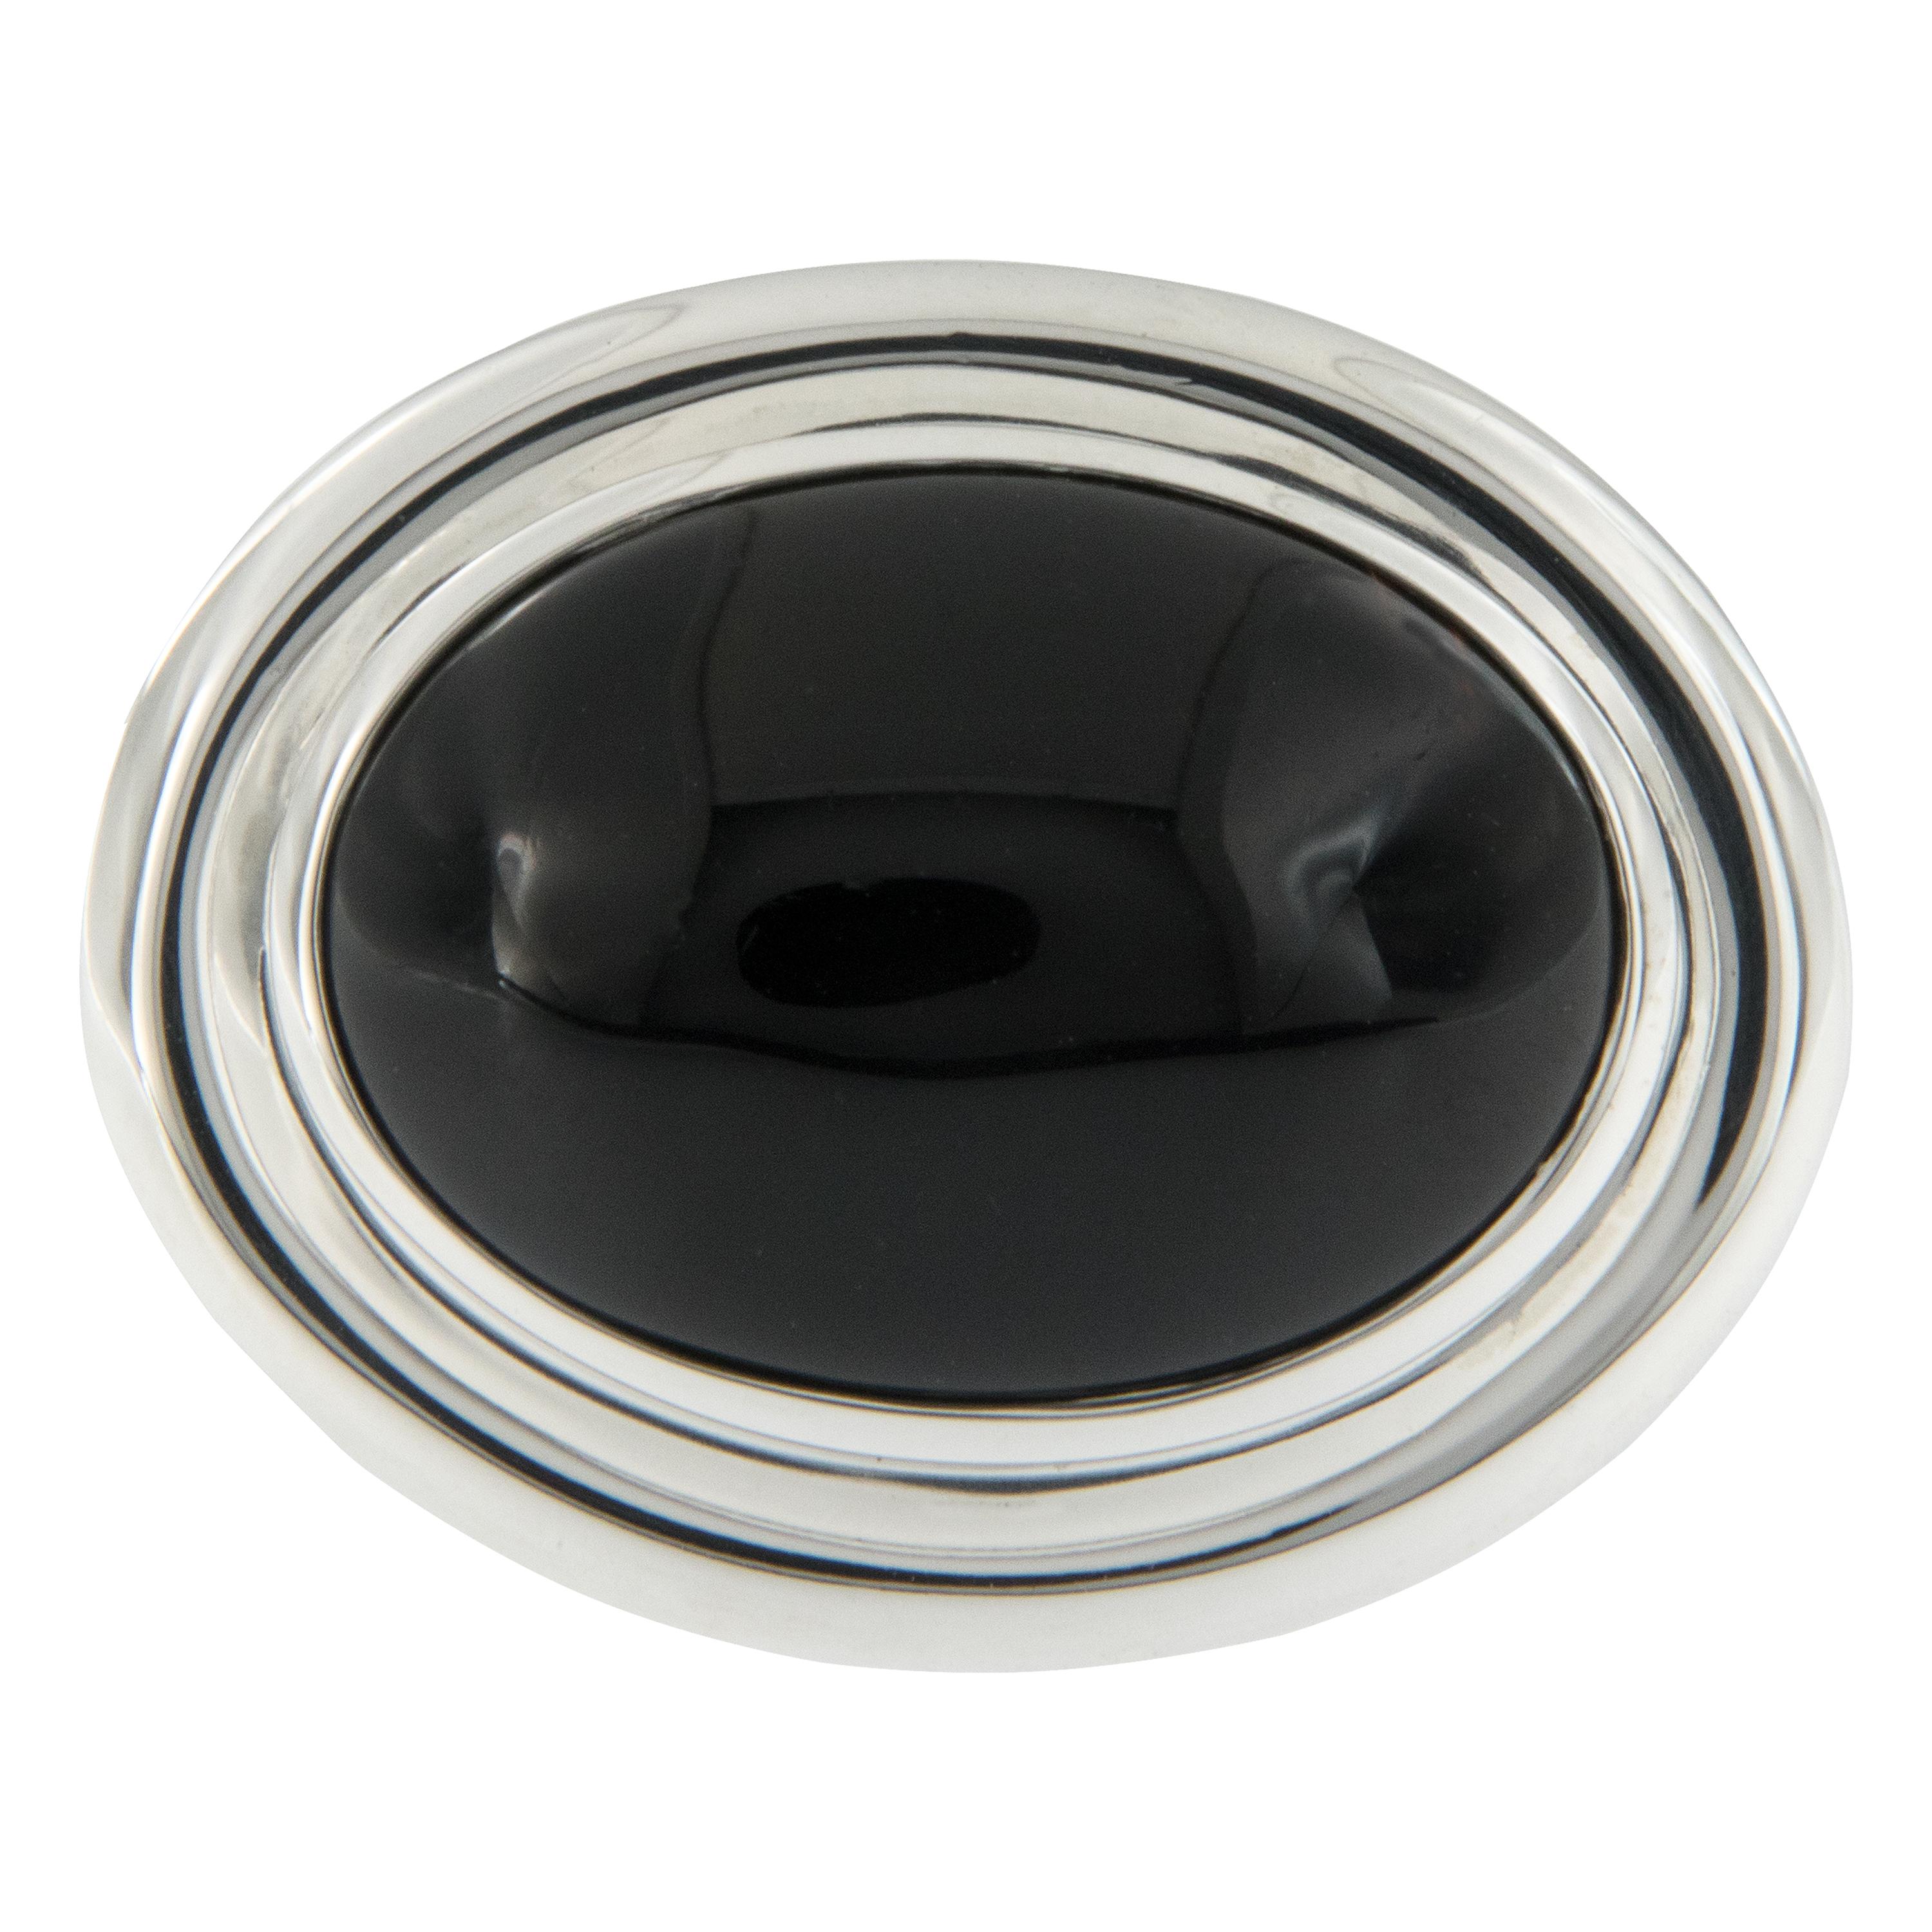 What is more versatile than a black onyx & silver ring designed by Paloma Picasso for Tiffany & Co. ? This estate black onyx oval cabochon ring goes with everything from your jeans to your little black dress! Paloma Picasso, daughter of artist Pablo